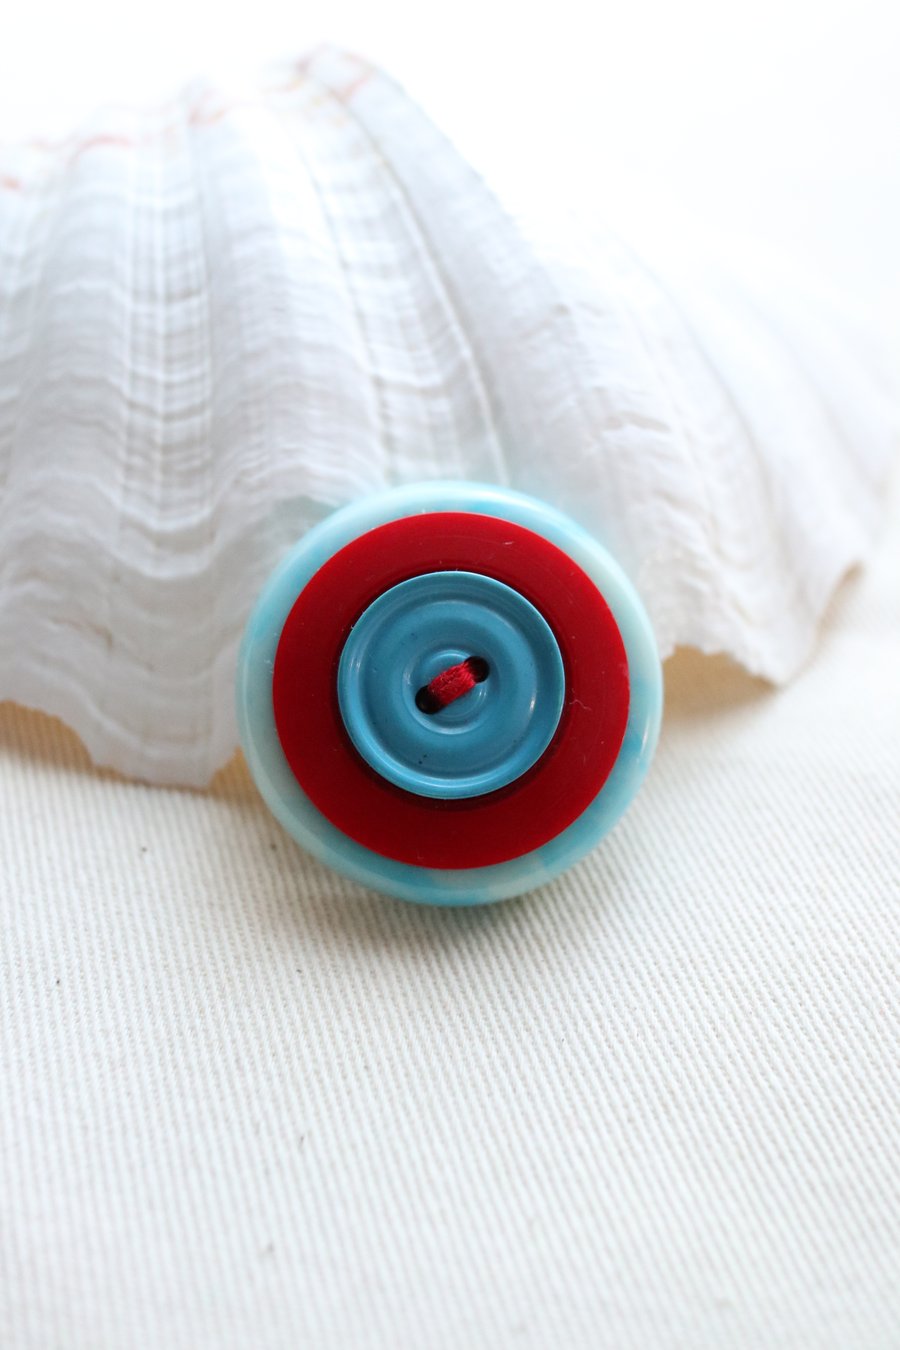  SALE - Vivid buttons Bright Turquoise and Red Vintage Button Statement Pin